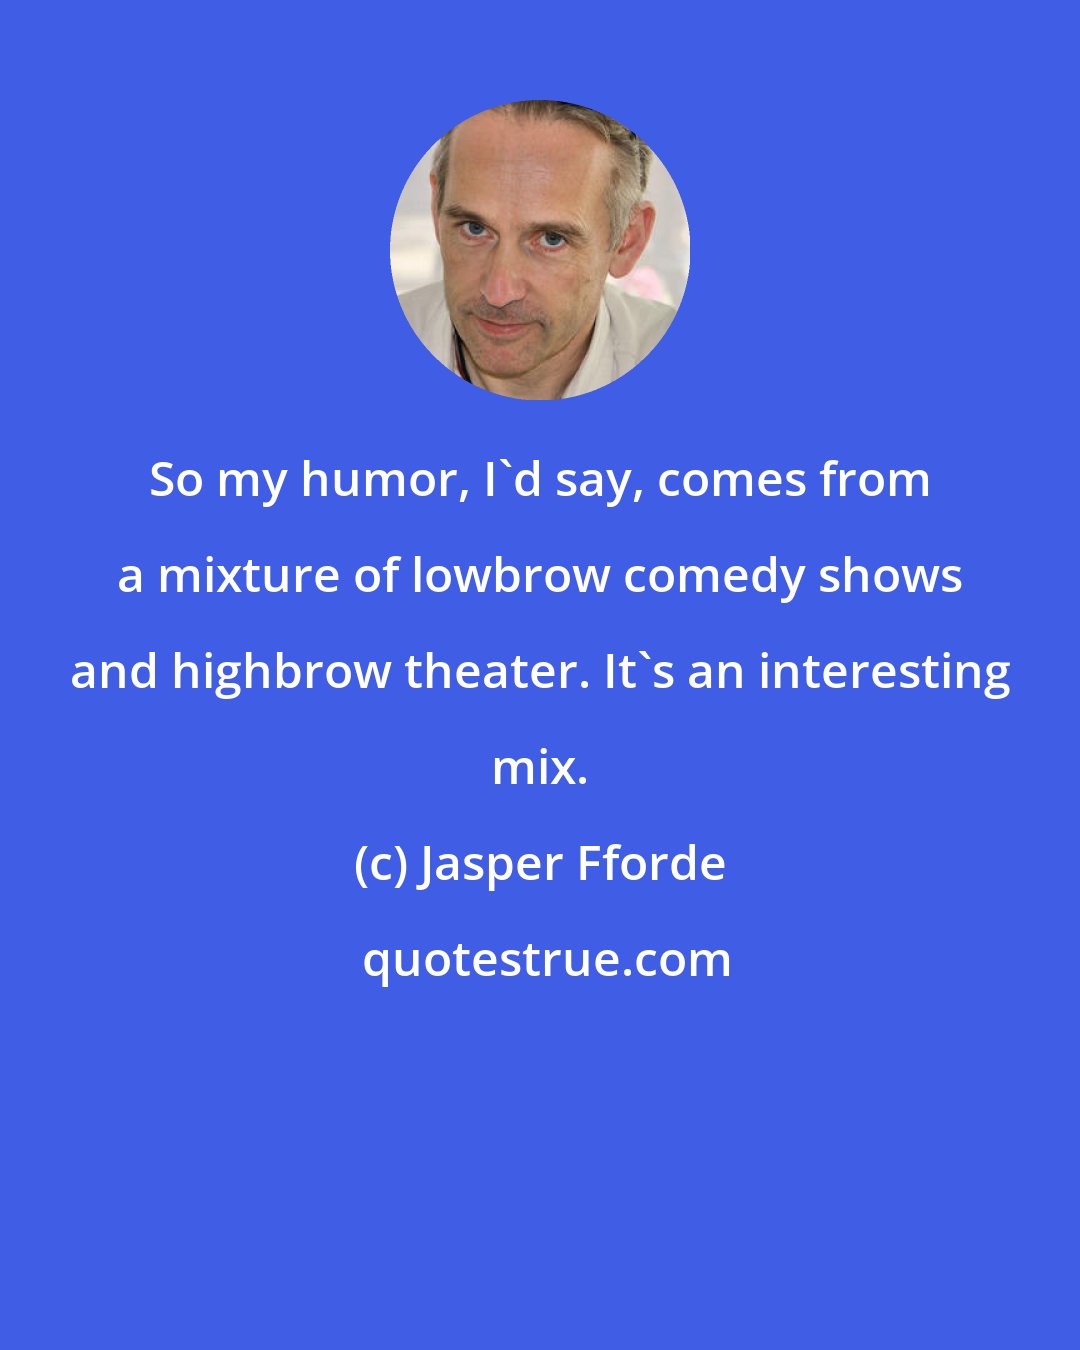 Jasper Fforde: So my humor, I'd say, comes from a mixture of lowbrow comedy shows and highbrow theater. It's an interesting mix.